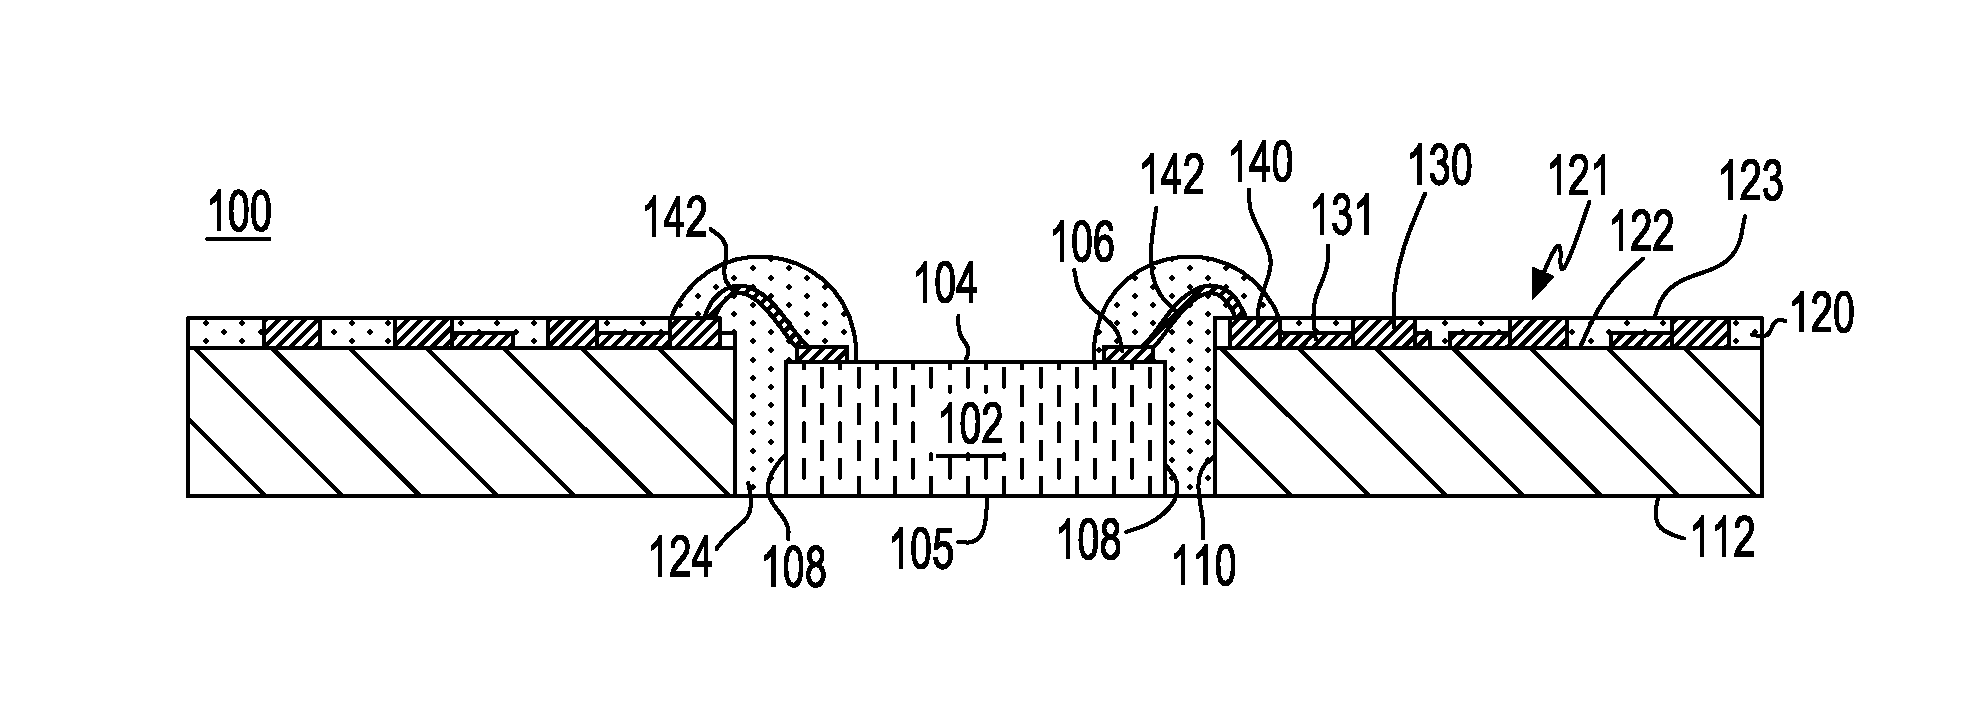 Wafer level packages with mechanically decoupled fan-in and fan-out areas